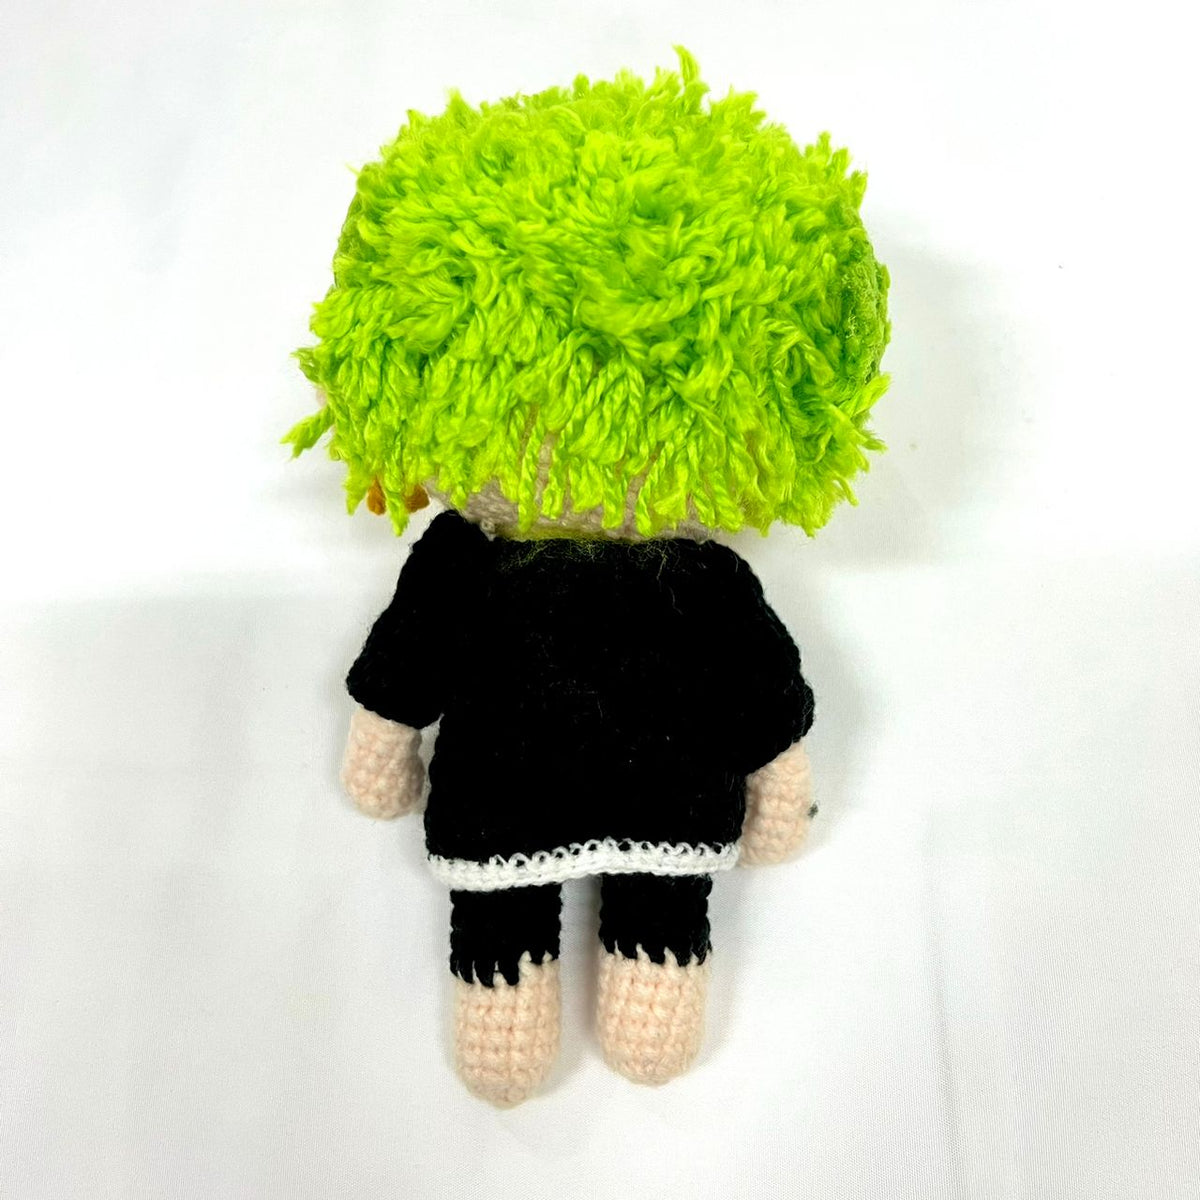 Fan Made One Piece Plush &quot;Roronoa Zoro&quot;-Fan Made-Ace Cards &amp; Collectibles